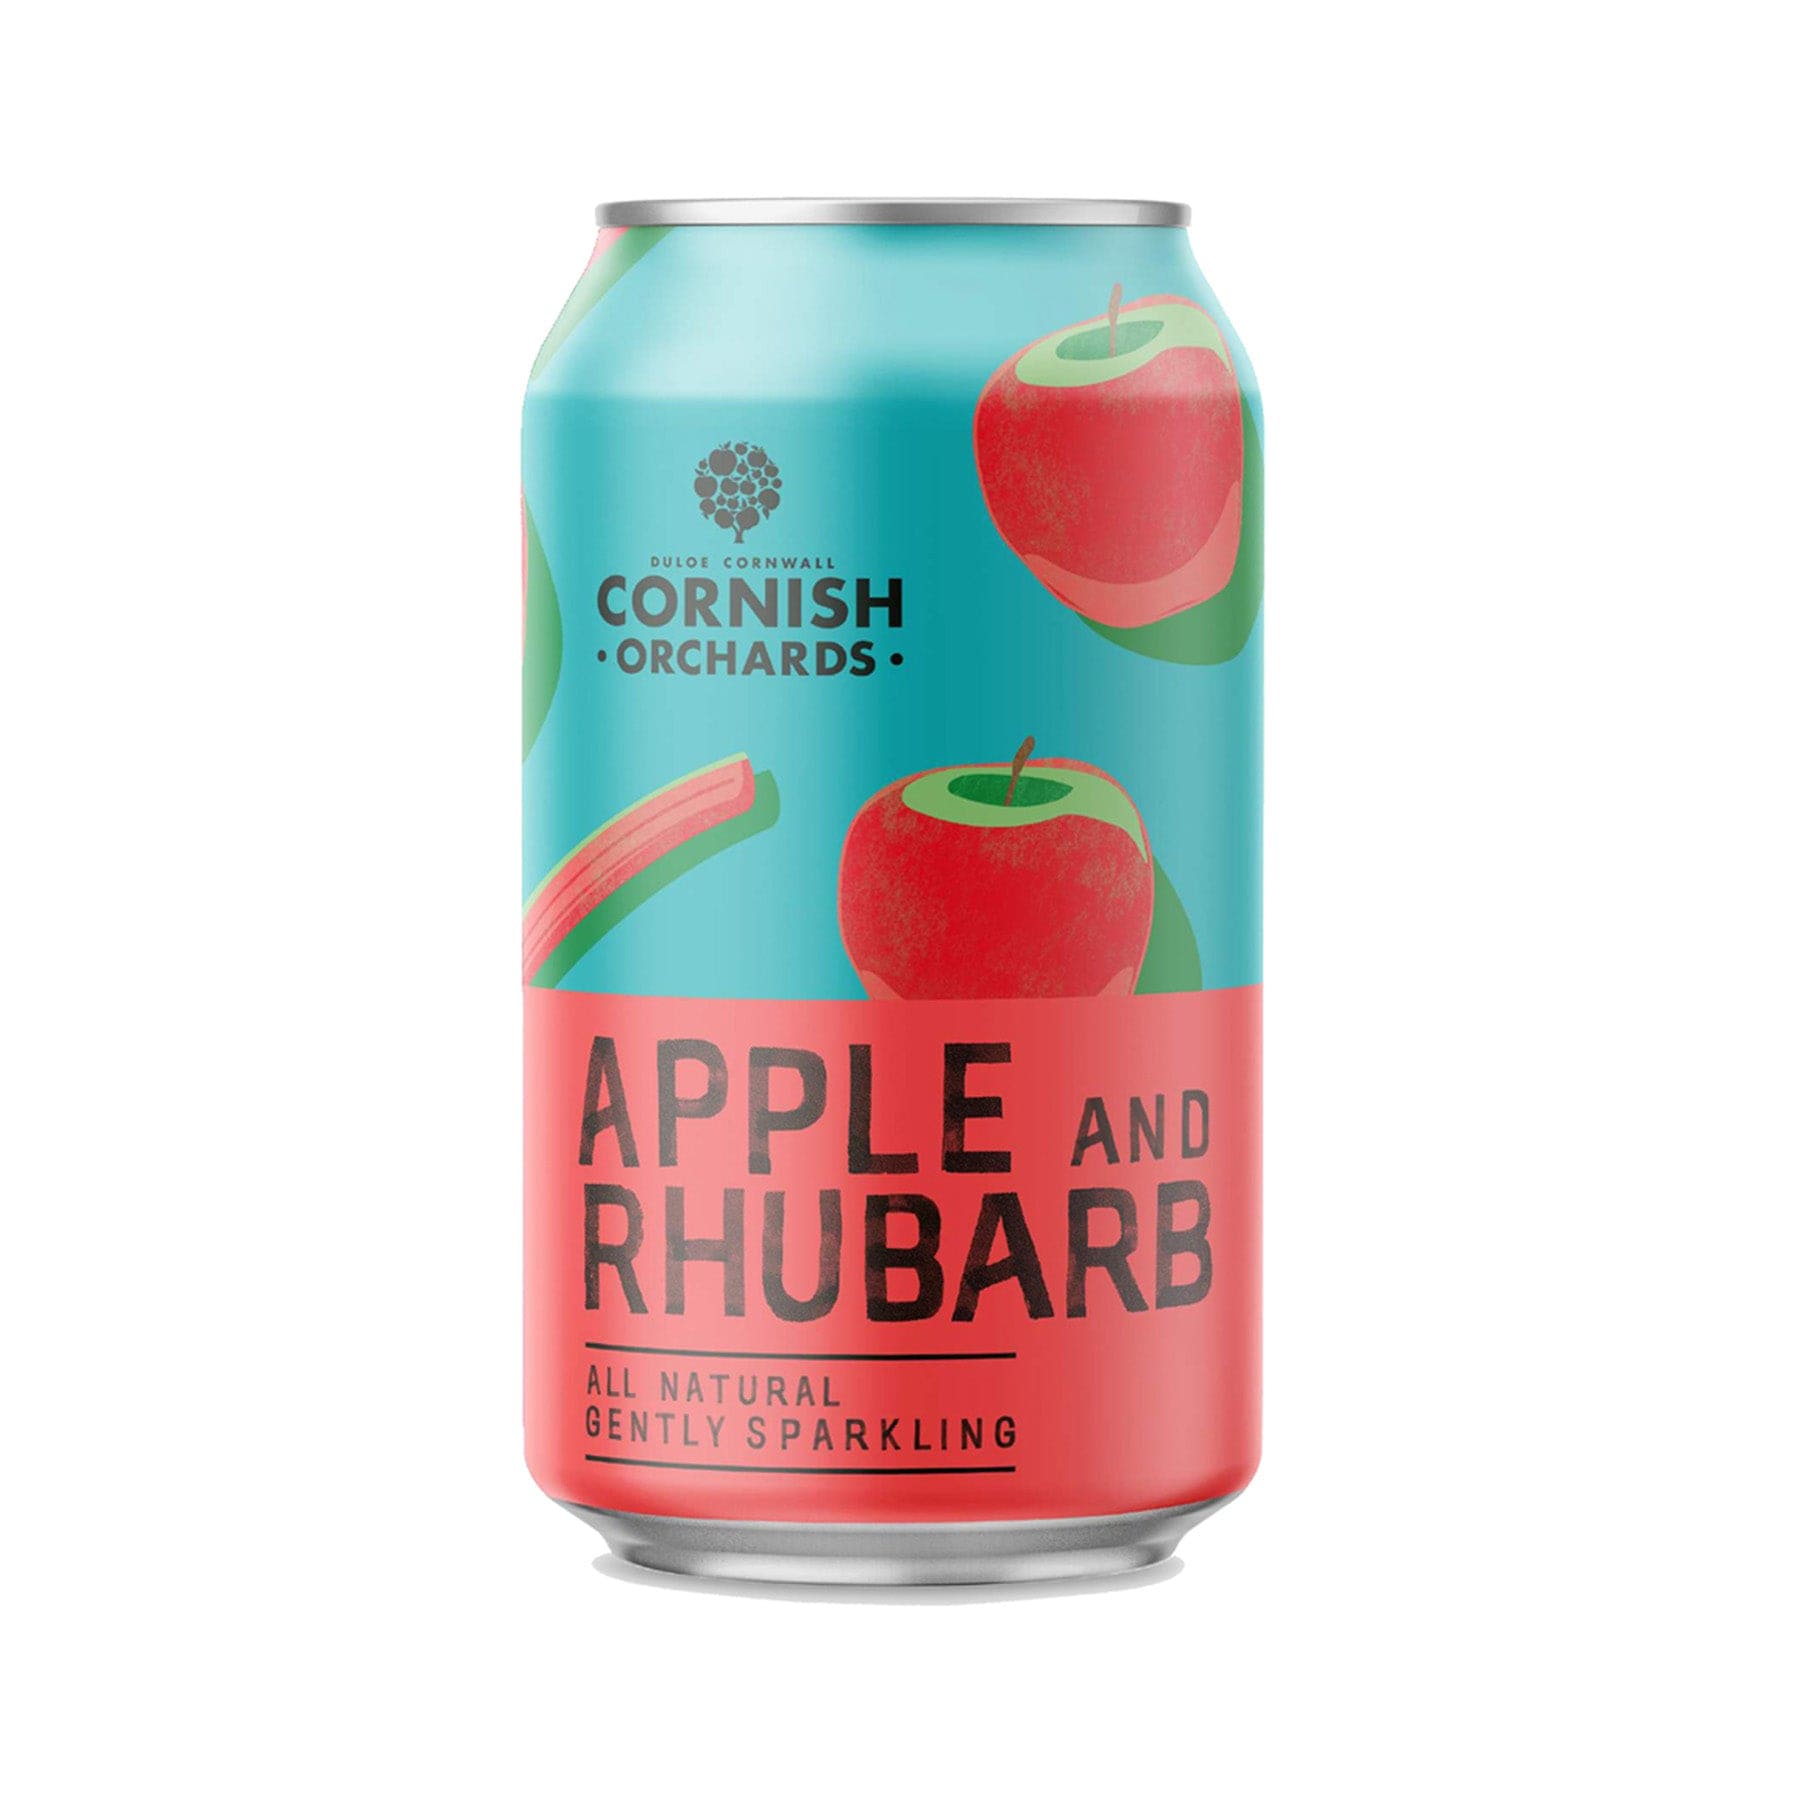 Cornish Orchards apple and rhubarb flavored drink can with illustration of red apples, all natural gently sparkling beverage, Duloe Cornwall branding on aqua and coral background.